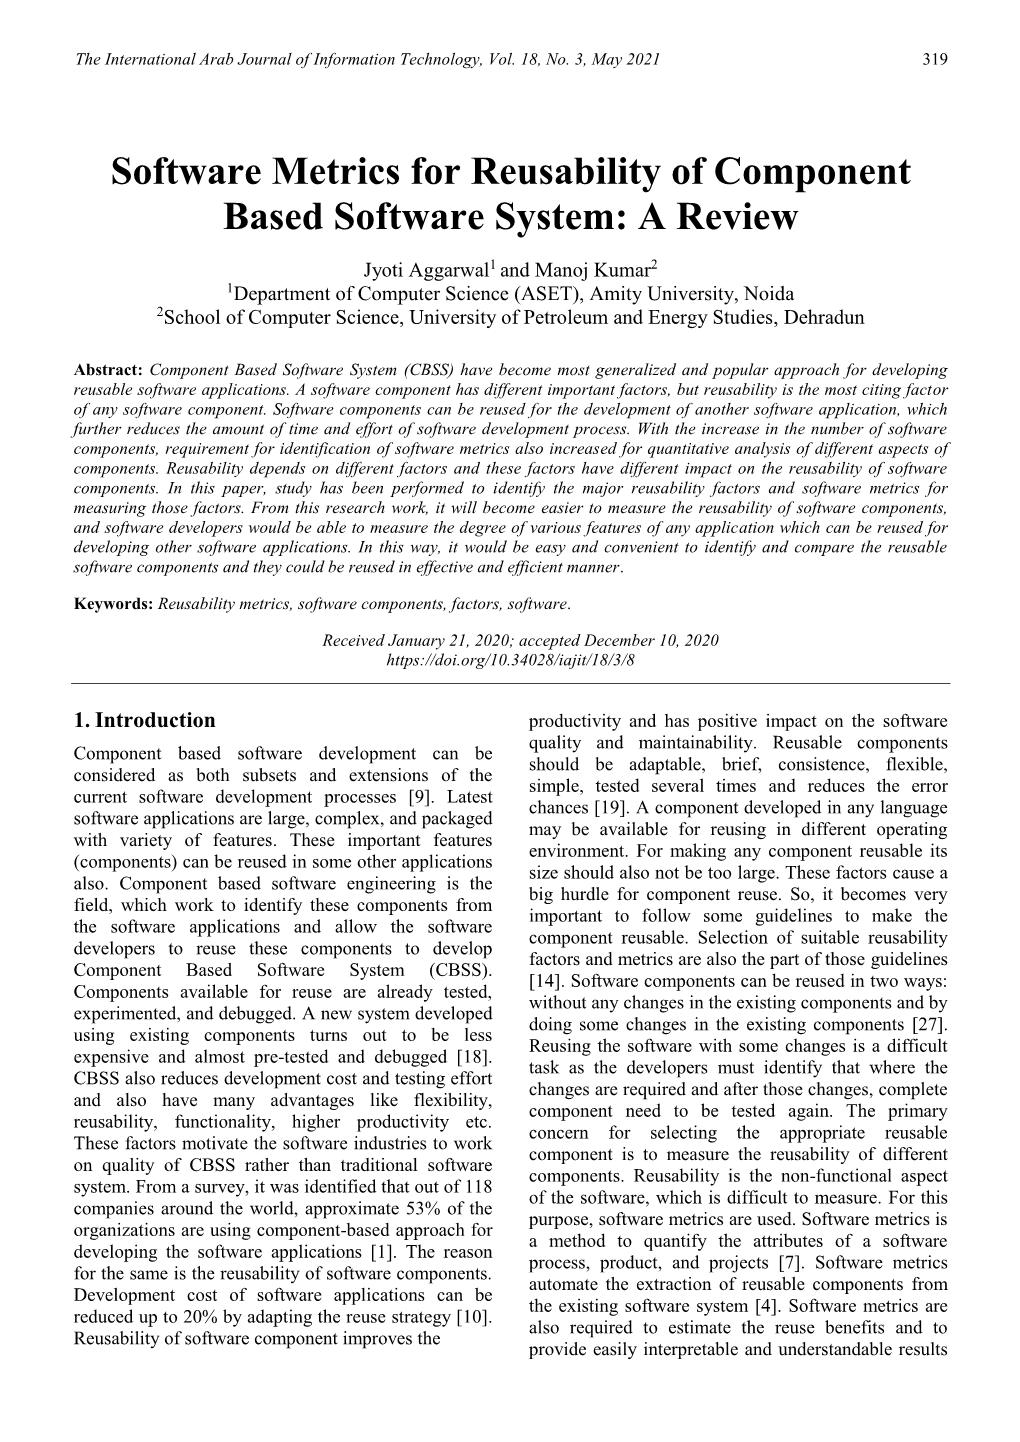 Software Metrics for Reusability of Component Based Software System: a Review